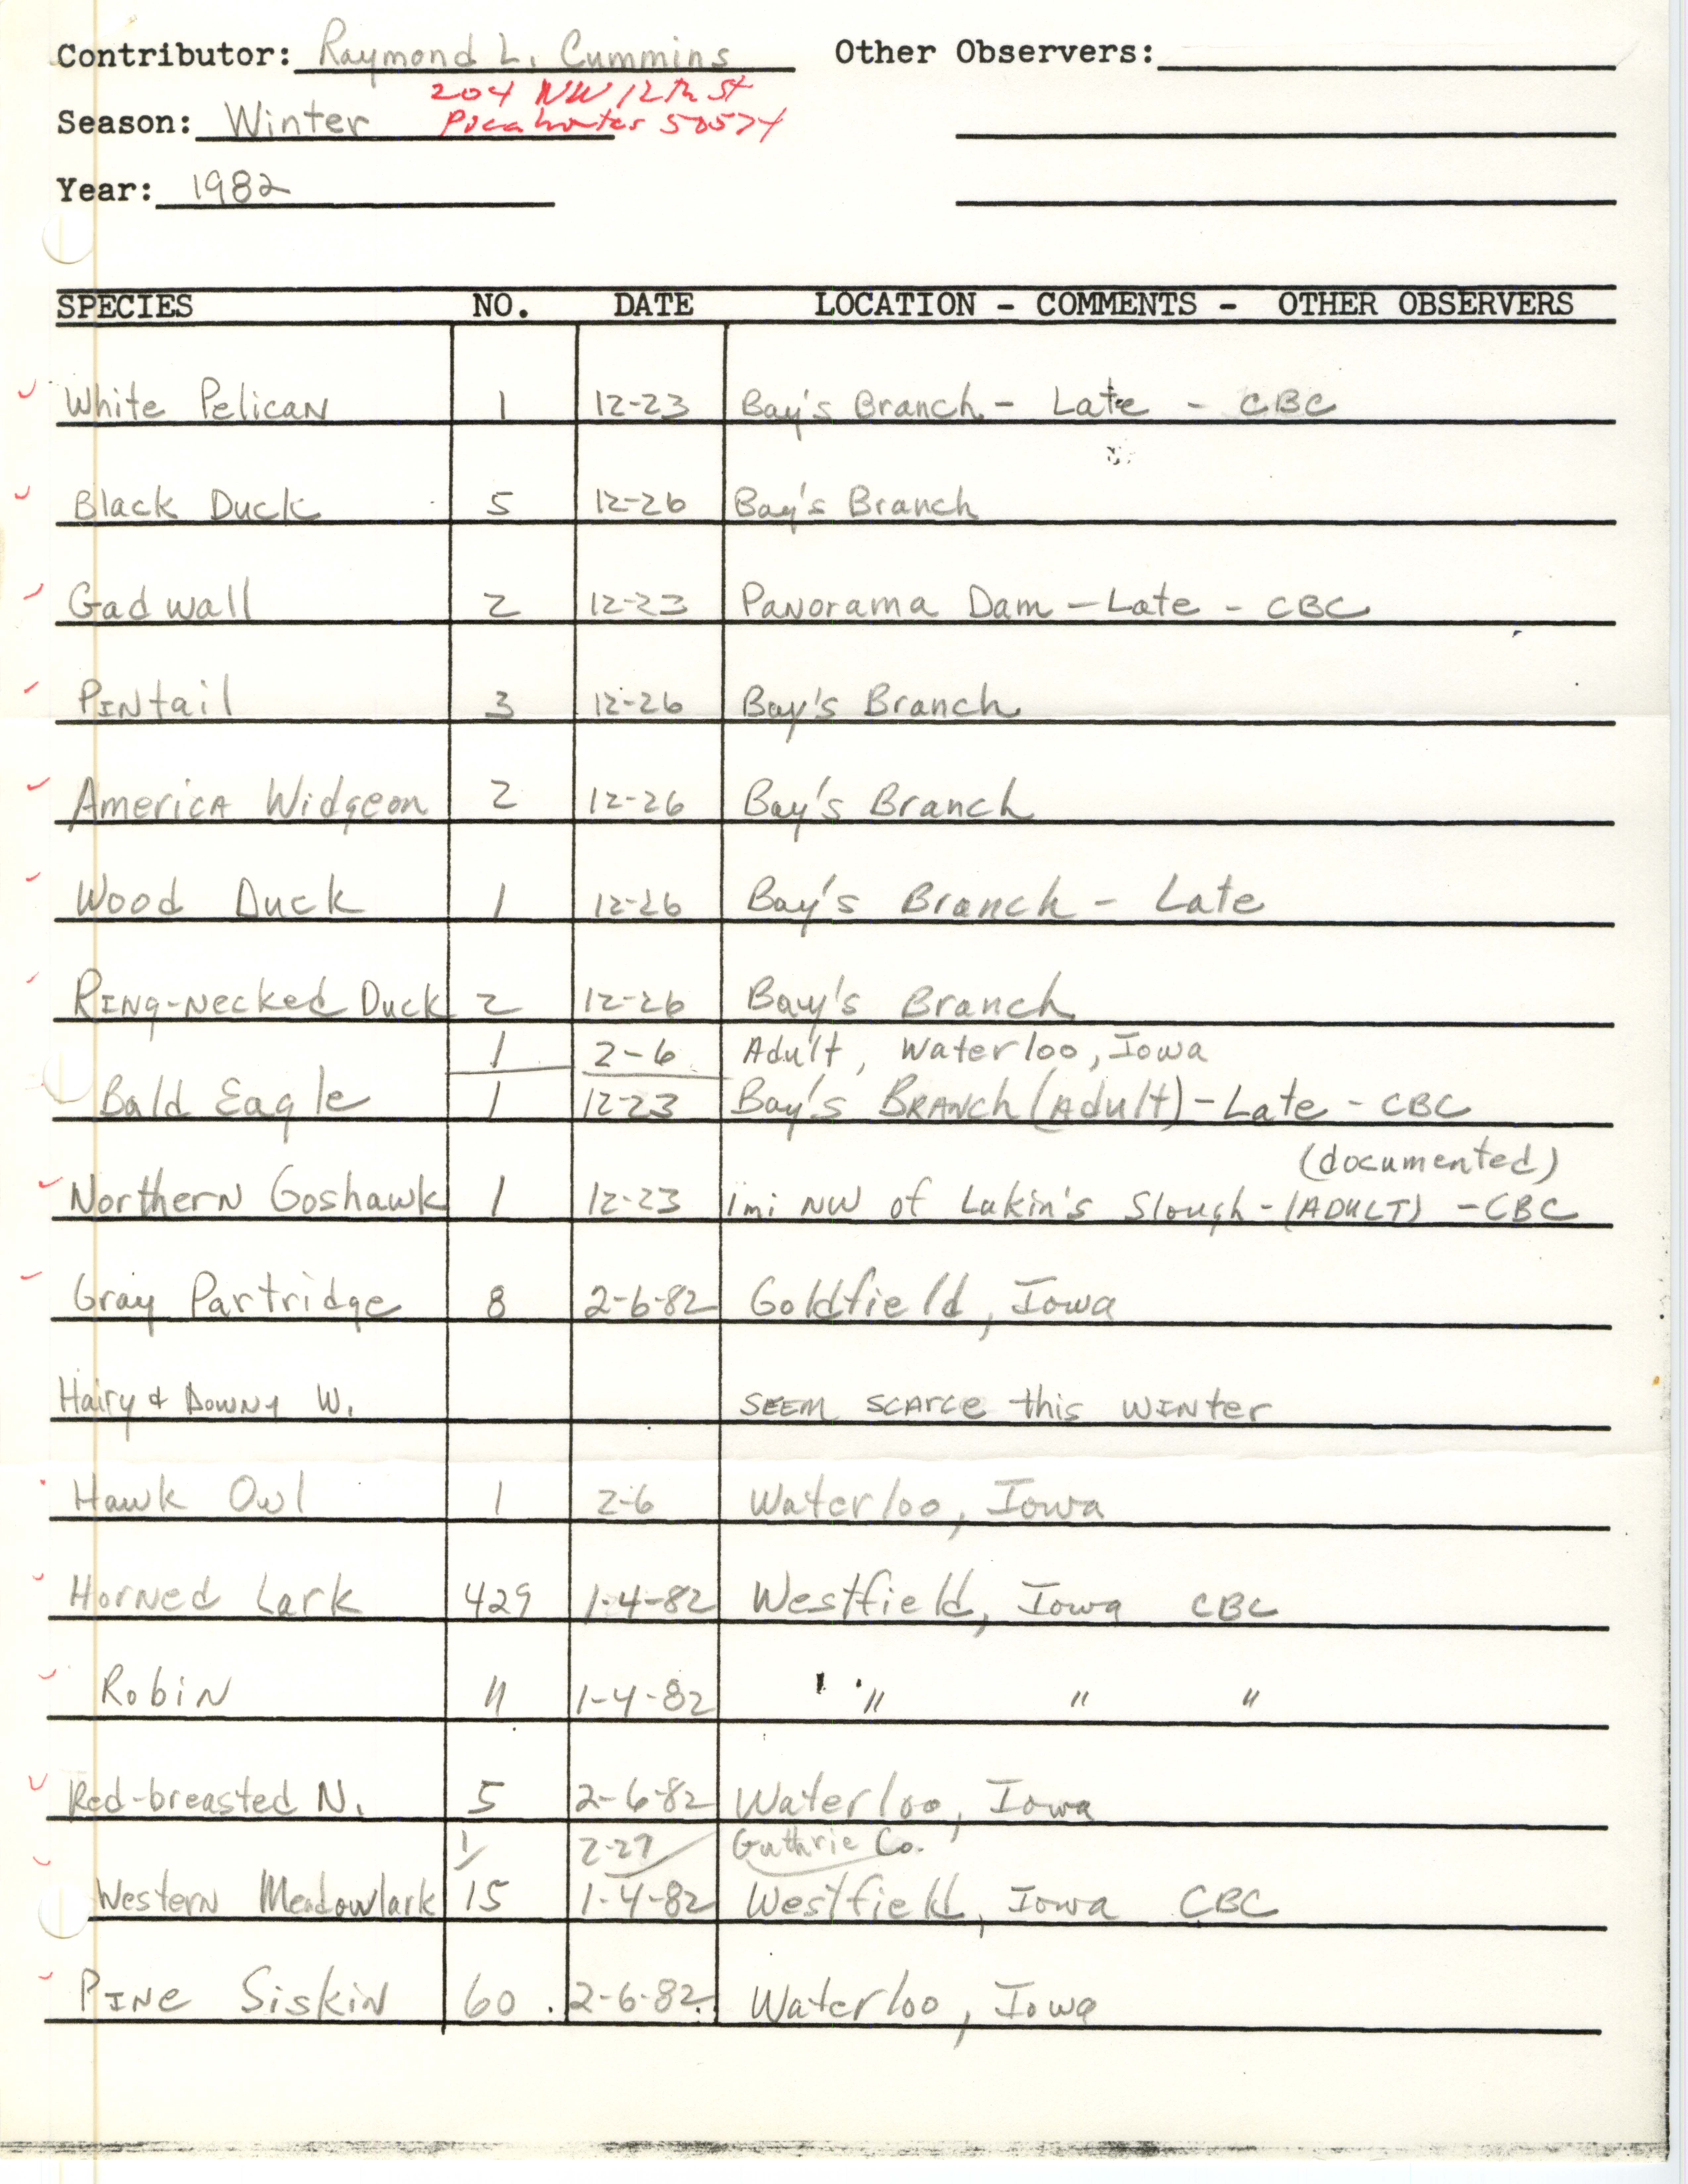 Field notes contributed by Raymond L. Cummins, winter 1981-1982